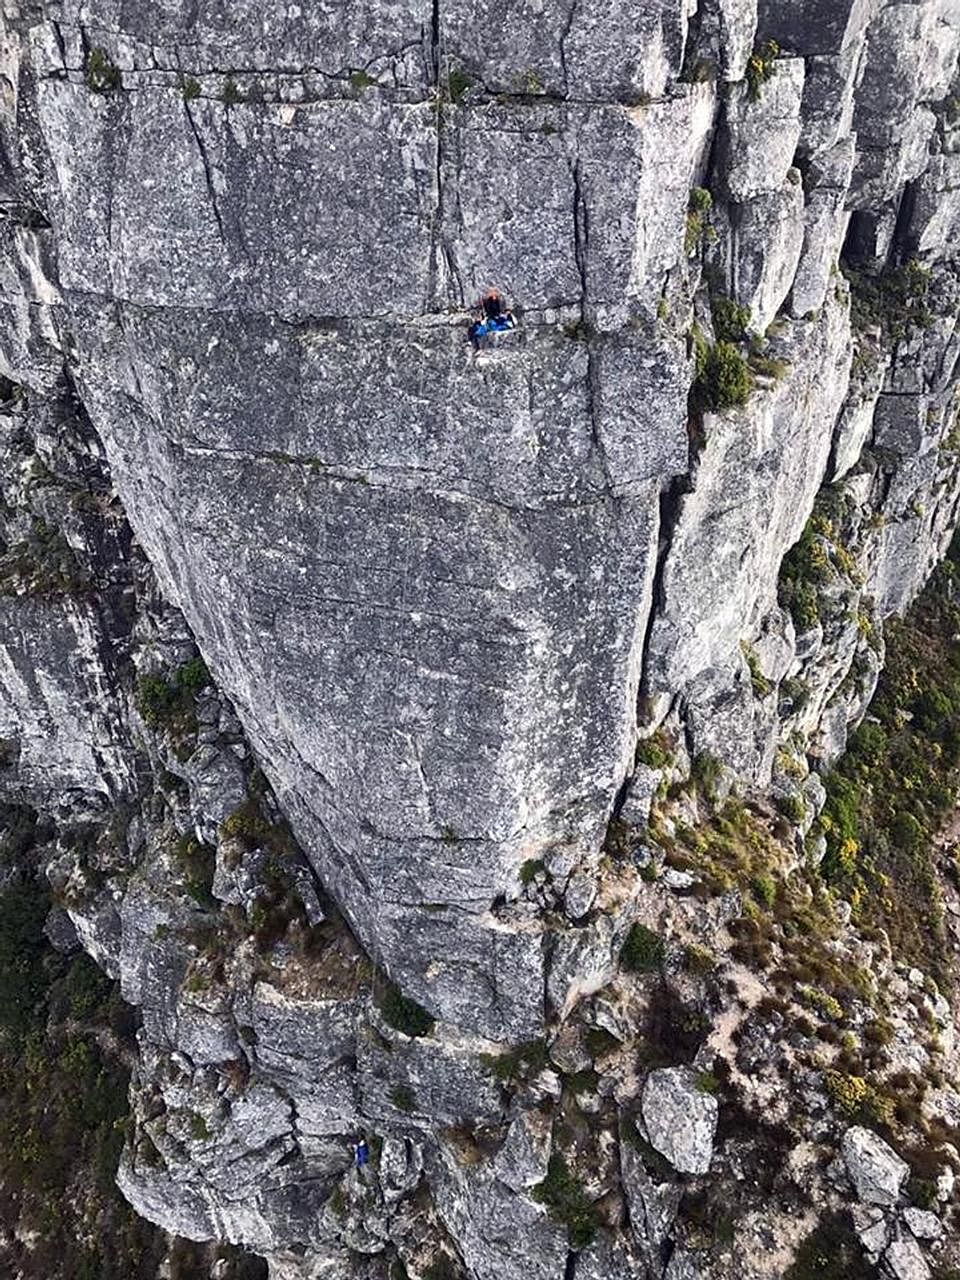 A climber receiving CPR by the side of Table Mountain in Cape Town, South Africa, on Monday. Hundreds of tourists were stranded during the 12-hour rescue operation involving 30 rescuers.